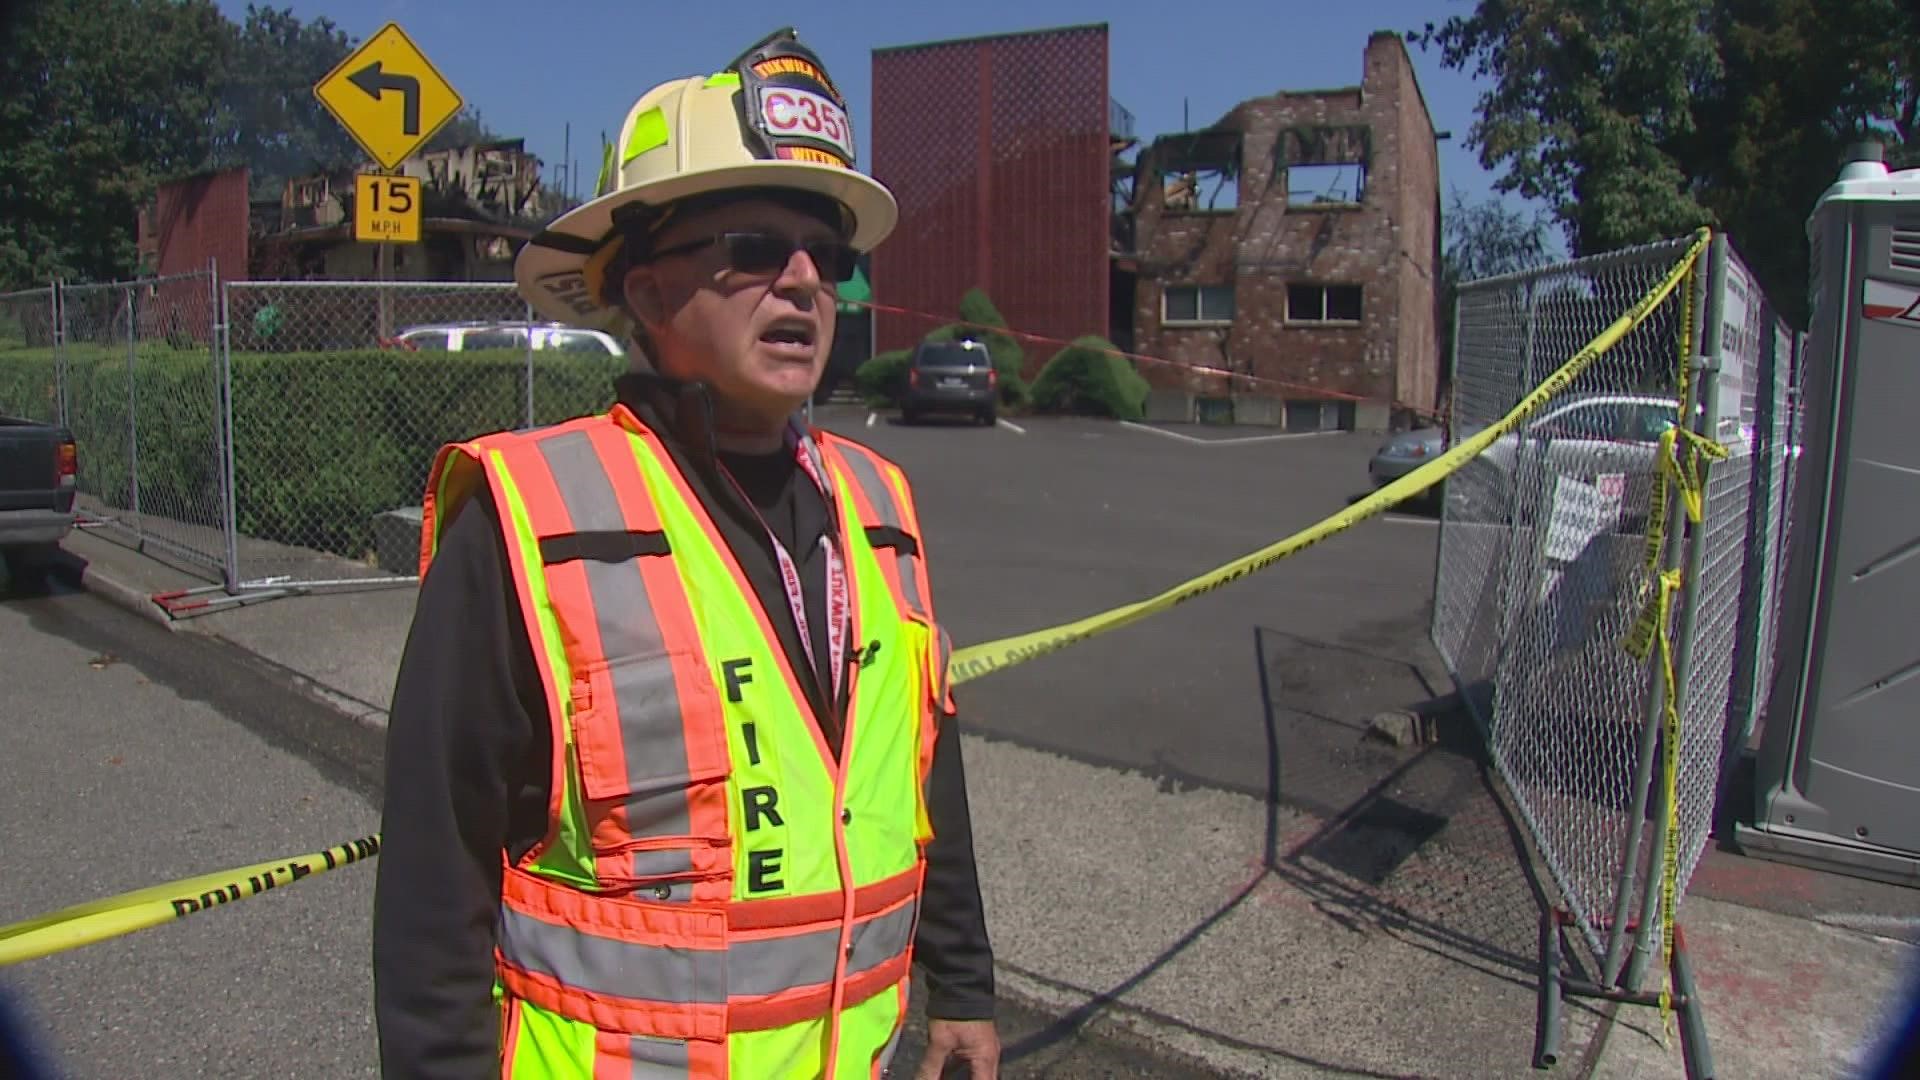 As the last few hot spots of an apartment fire in Tukwila are being put out, some are wondering why the fire could’ve gotten so bad in the first place.